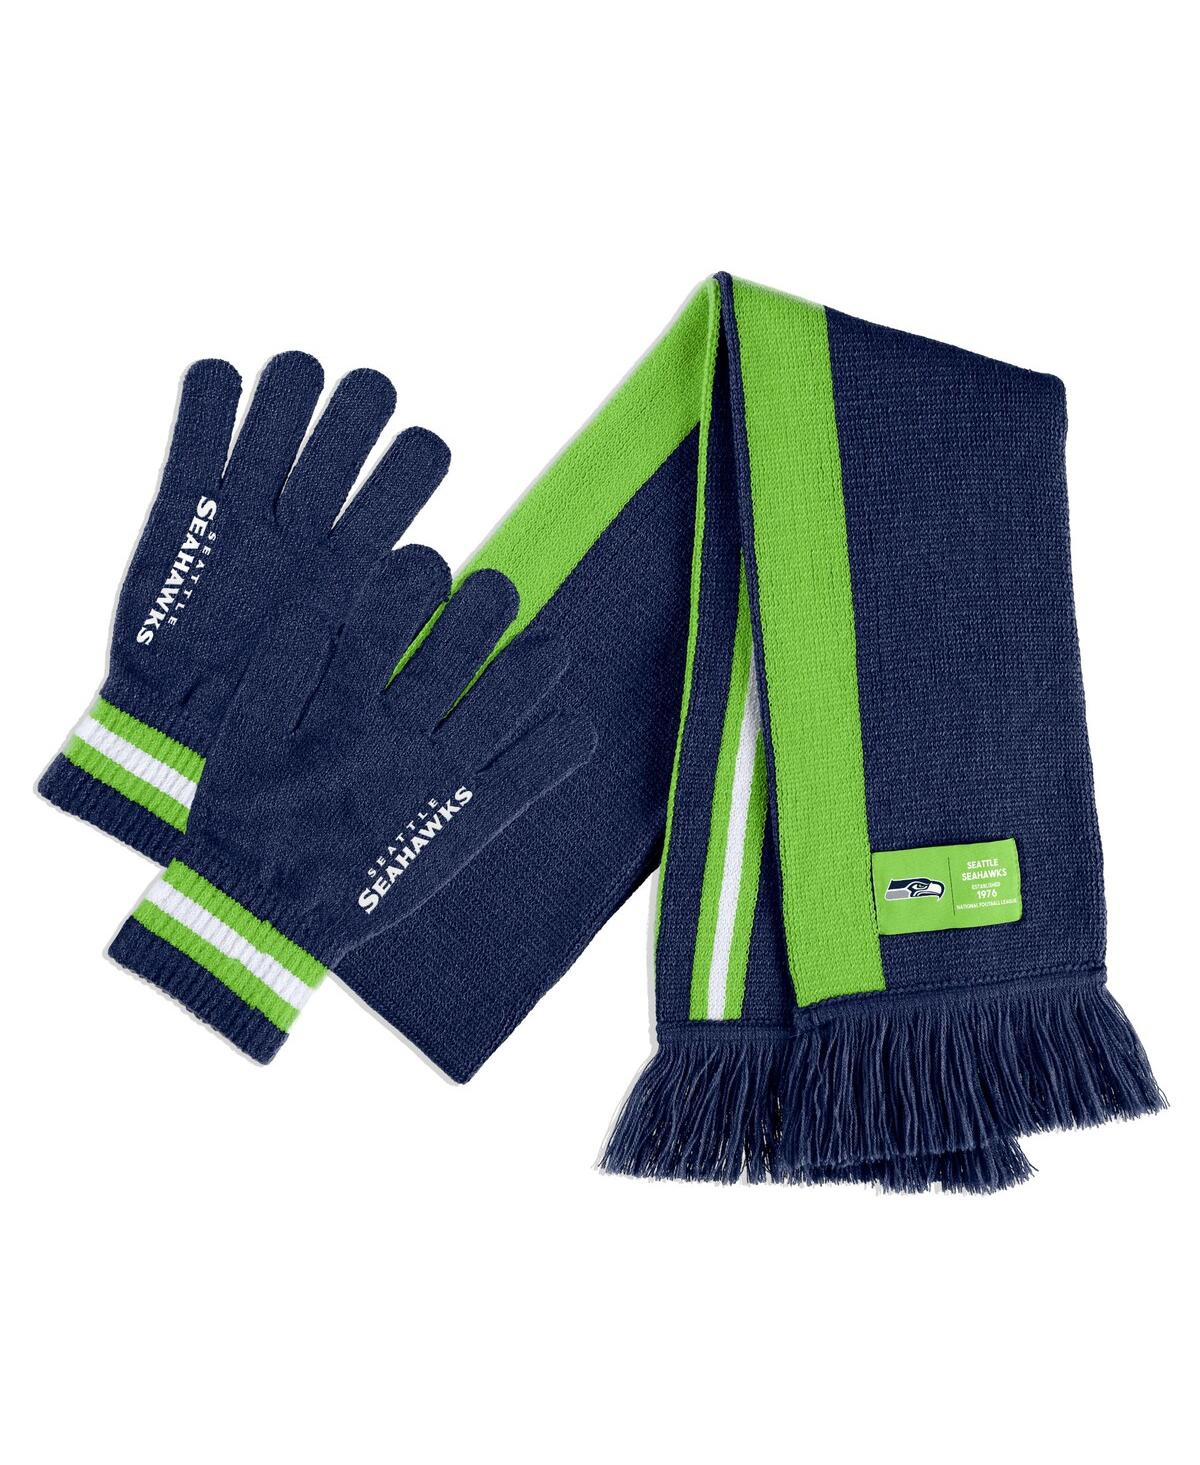 Women's Wear by Erin Andrews Seattle Seahawks Scarf and Glove Set - Navy, Green